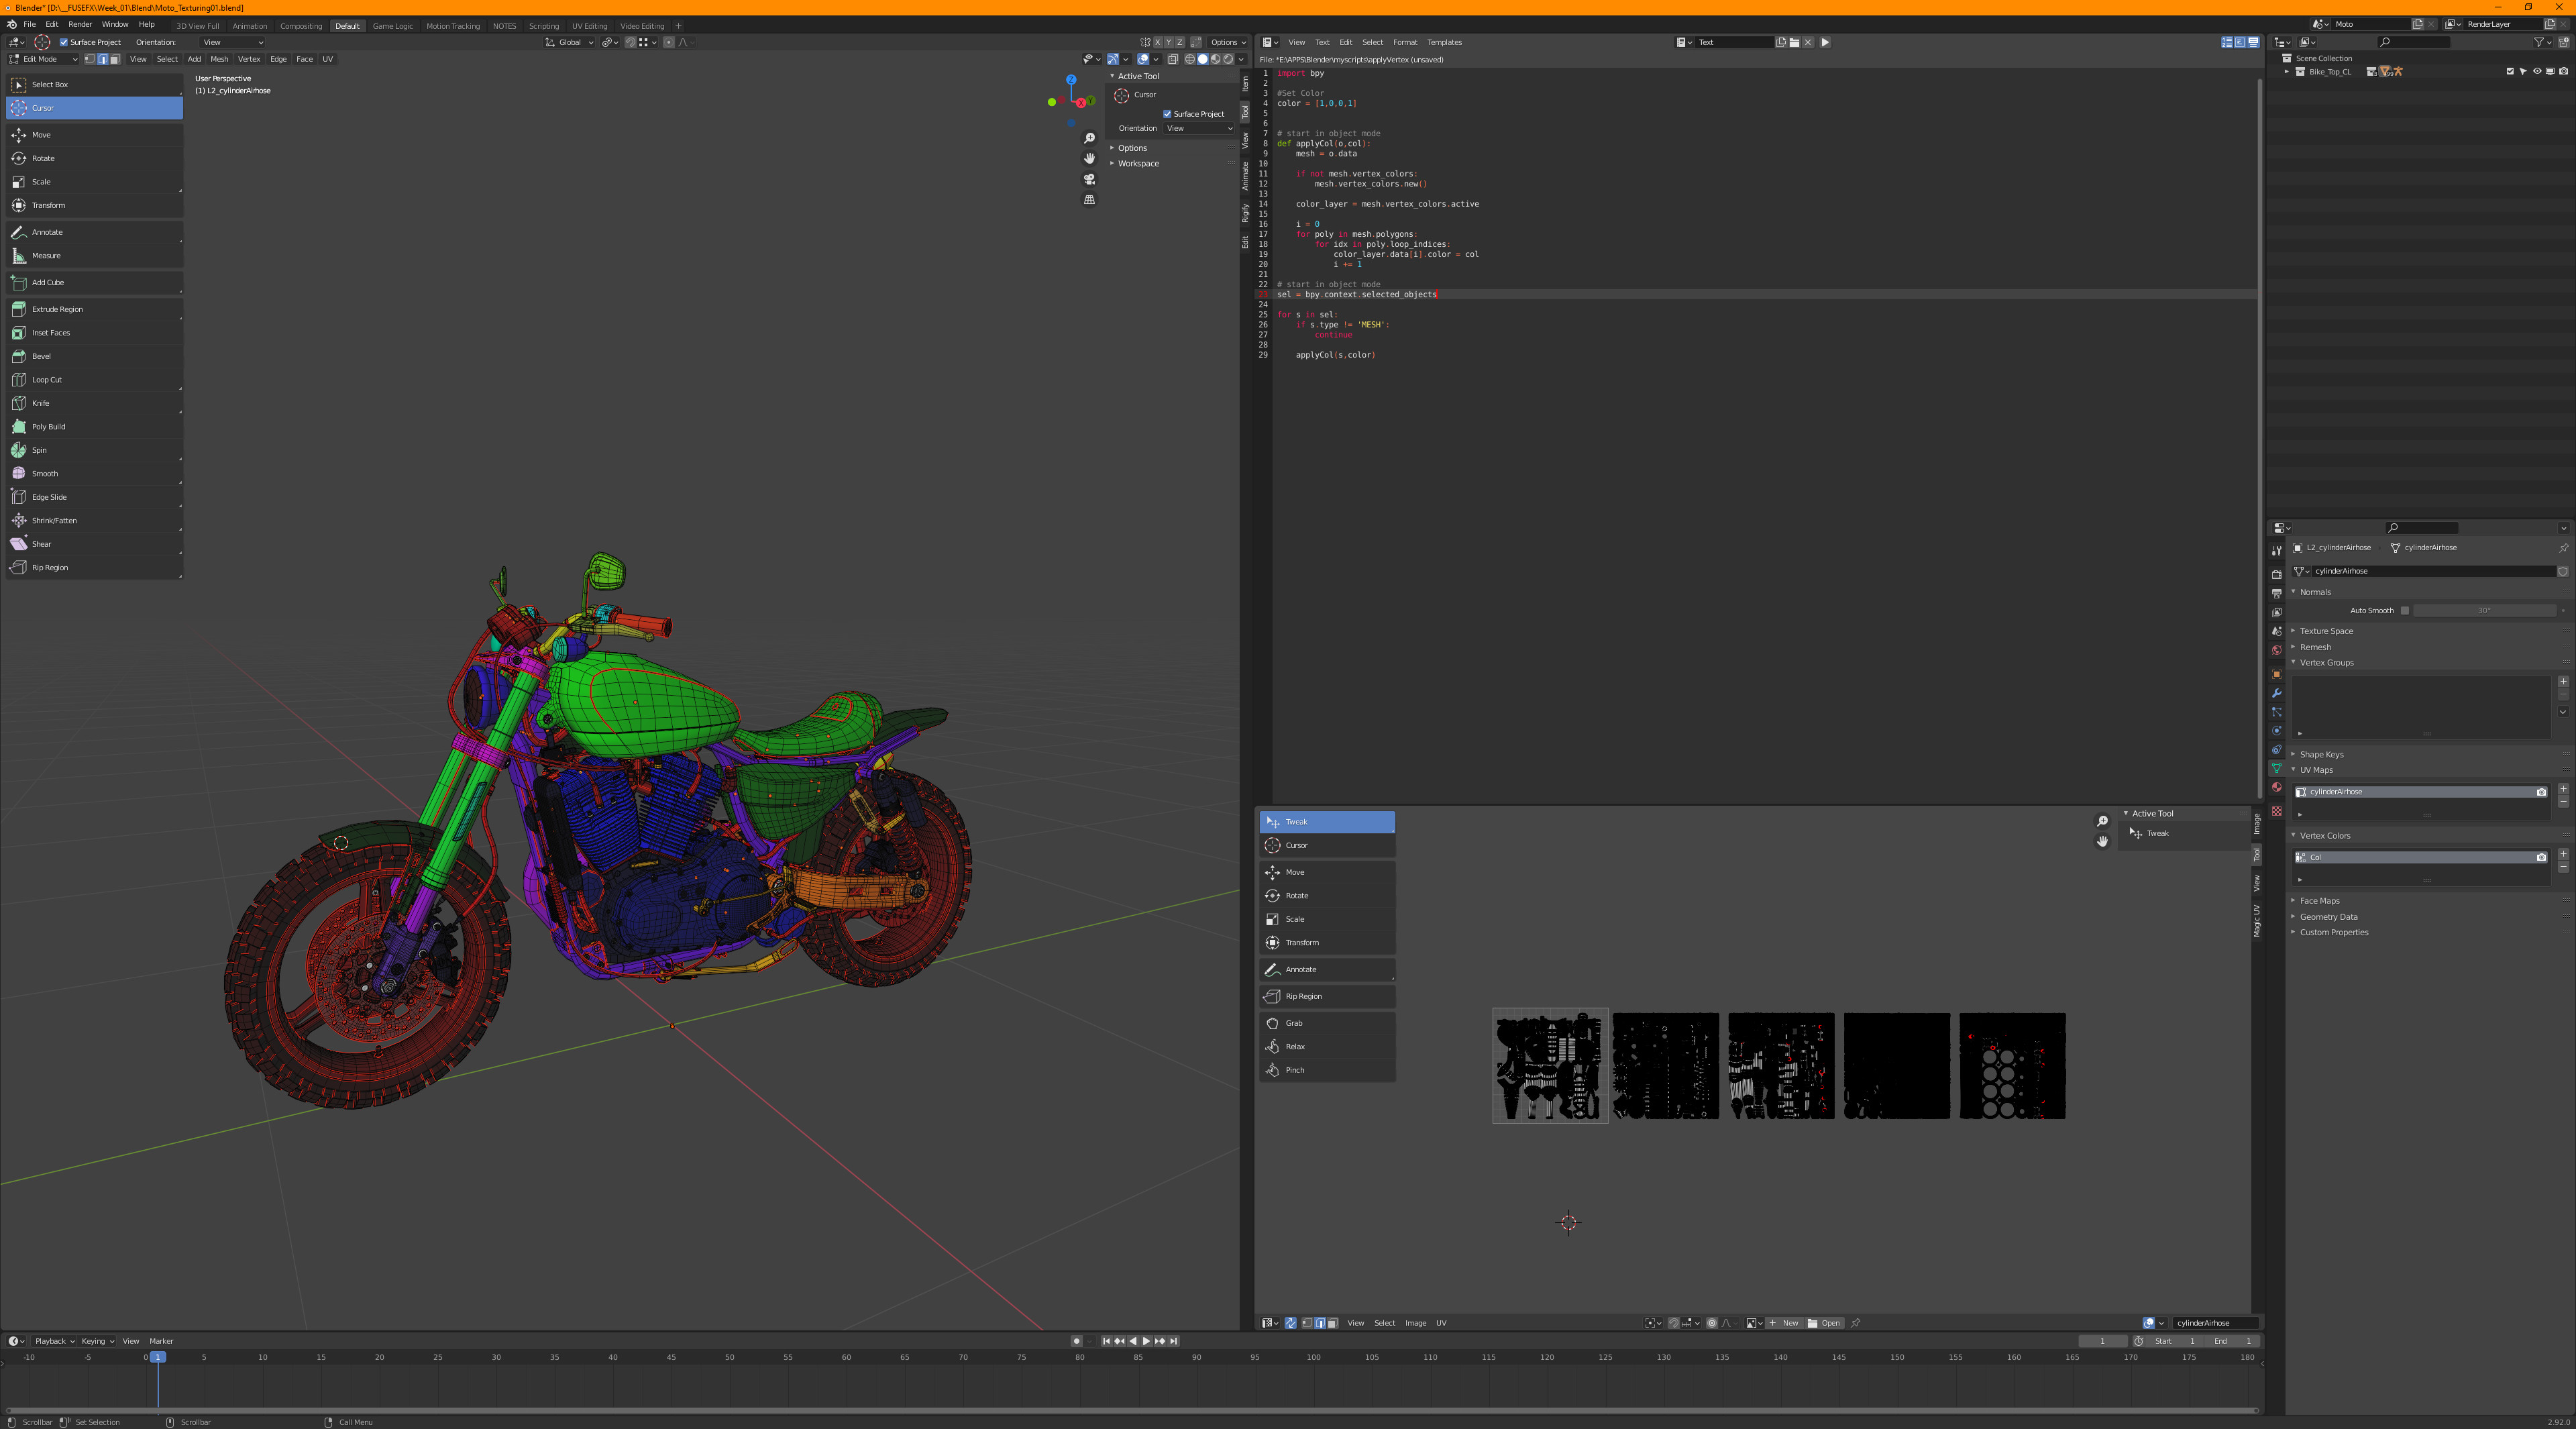 Re-UVing the bike in Blender. I made a script to apply vertex colors to bring into Substance Painter.